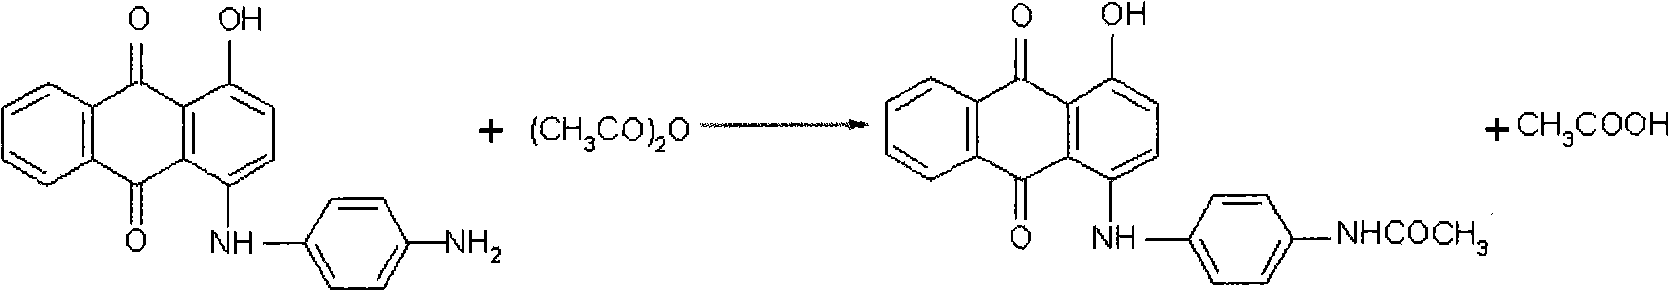 Method for synthesizing N-[4-[(4-hydroxyanthraquinone-1-yl) amino] benzyl] acetamide